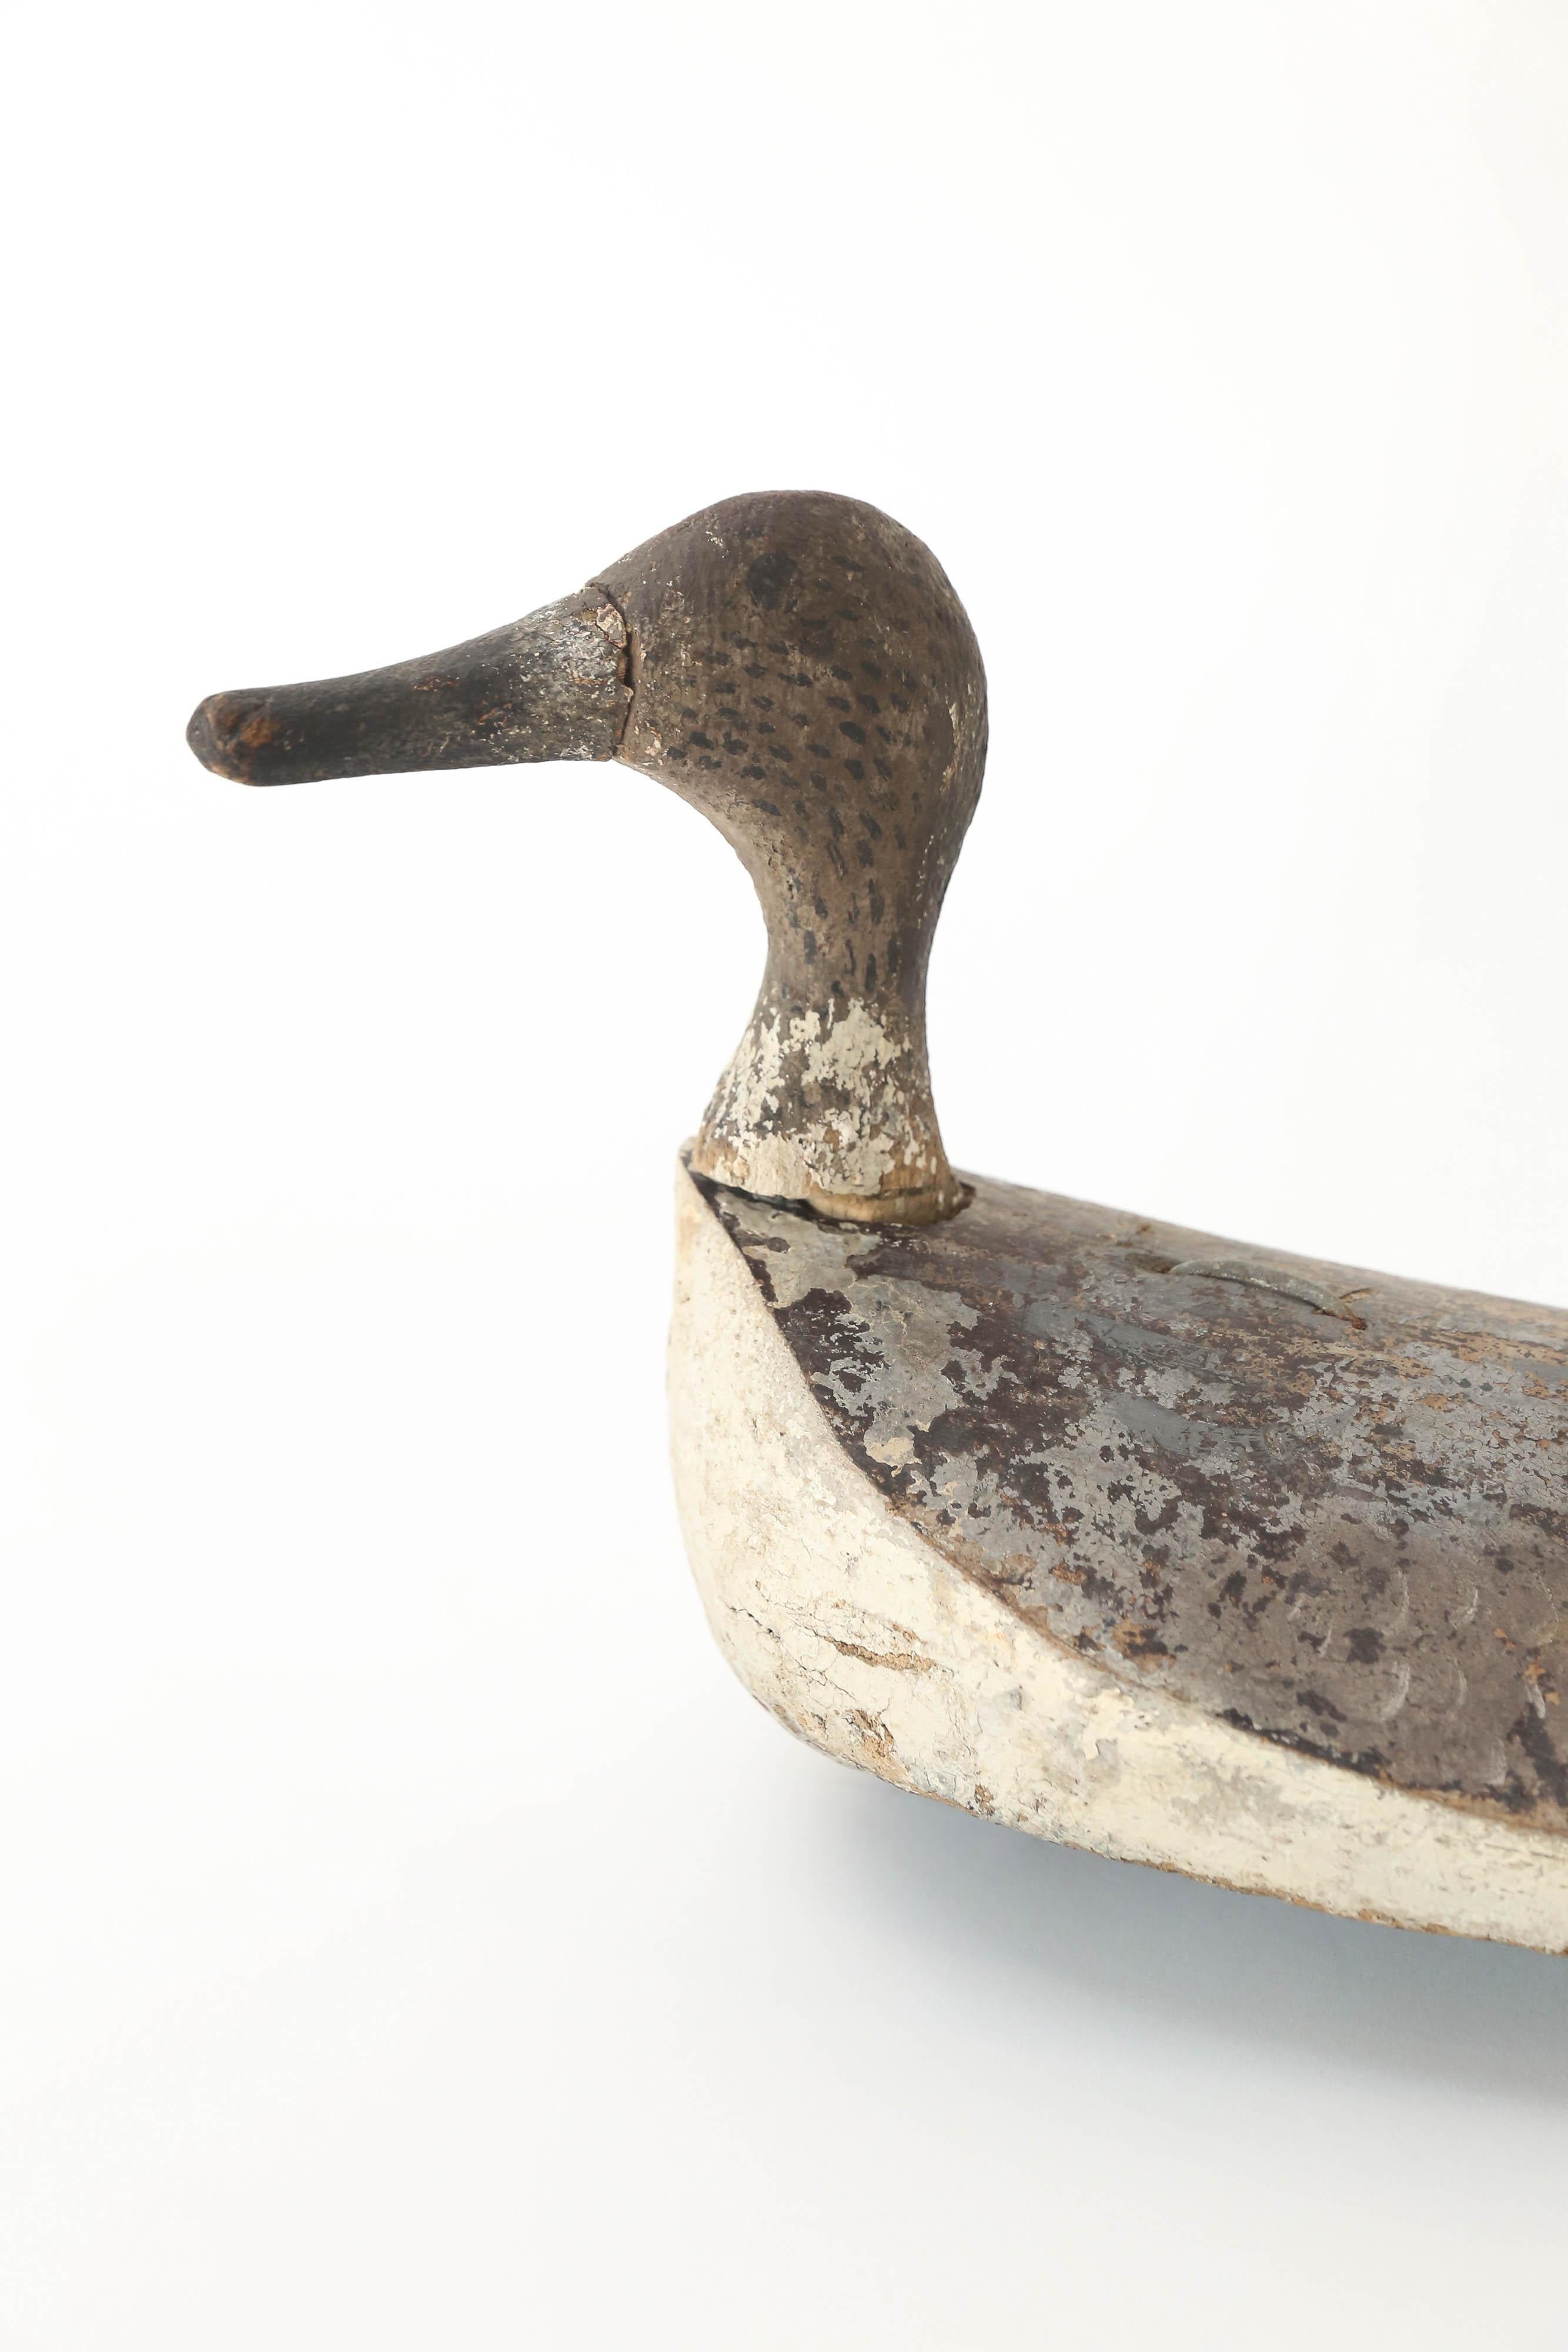 A hand-carved and painted wood duck decoy found in France. A wonderful addition for the collector.